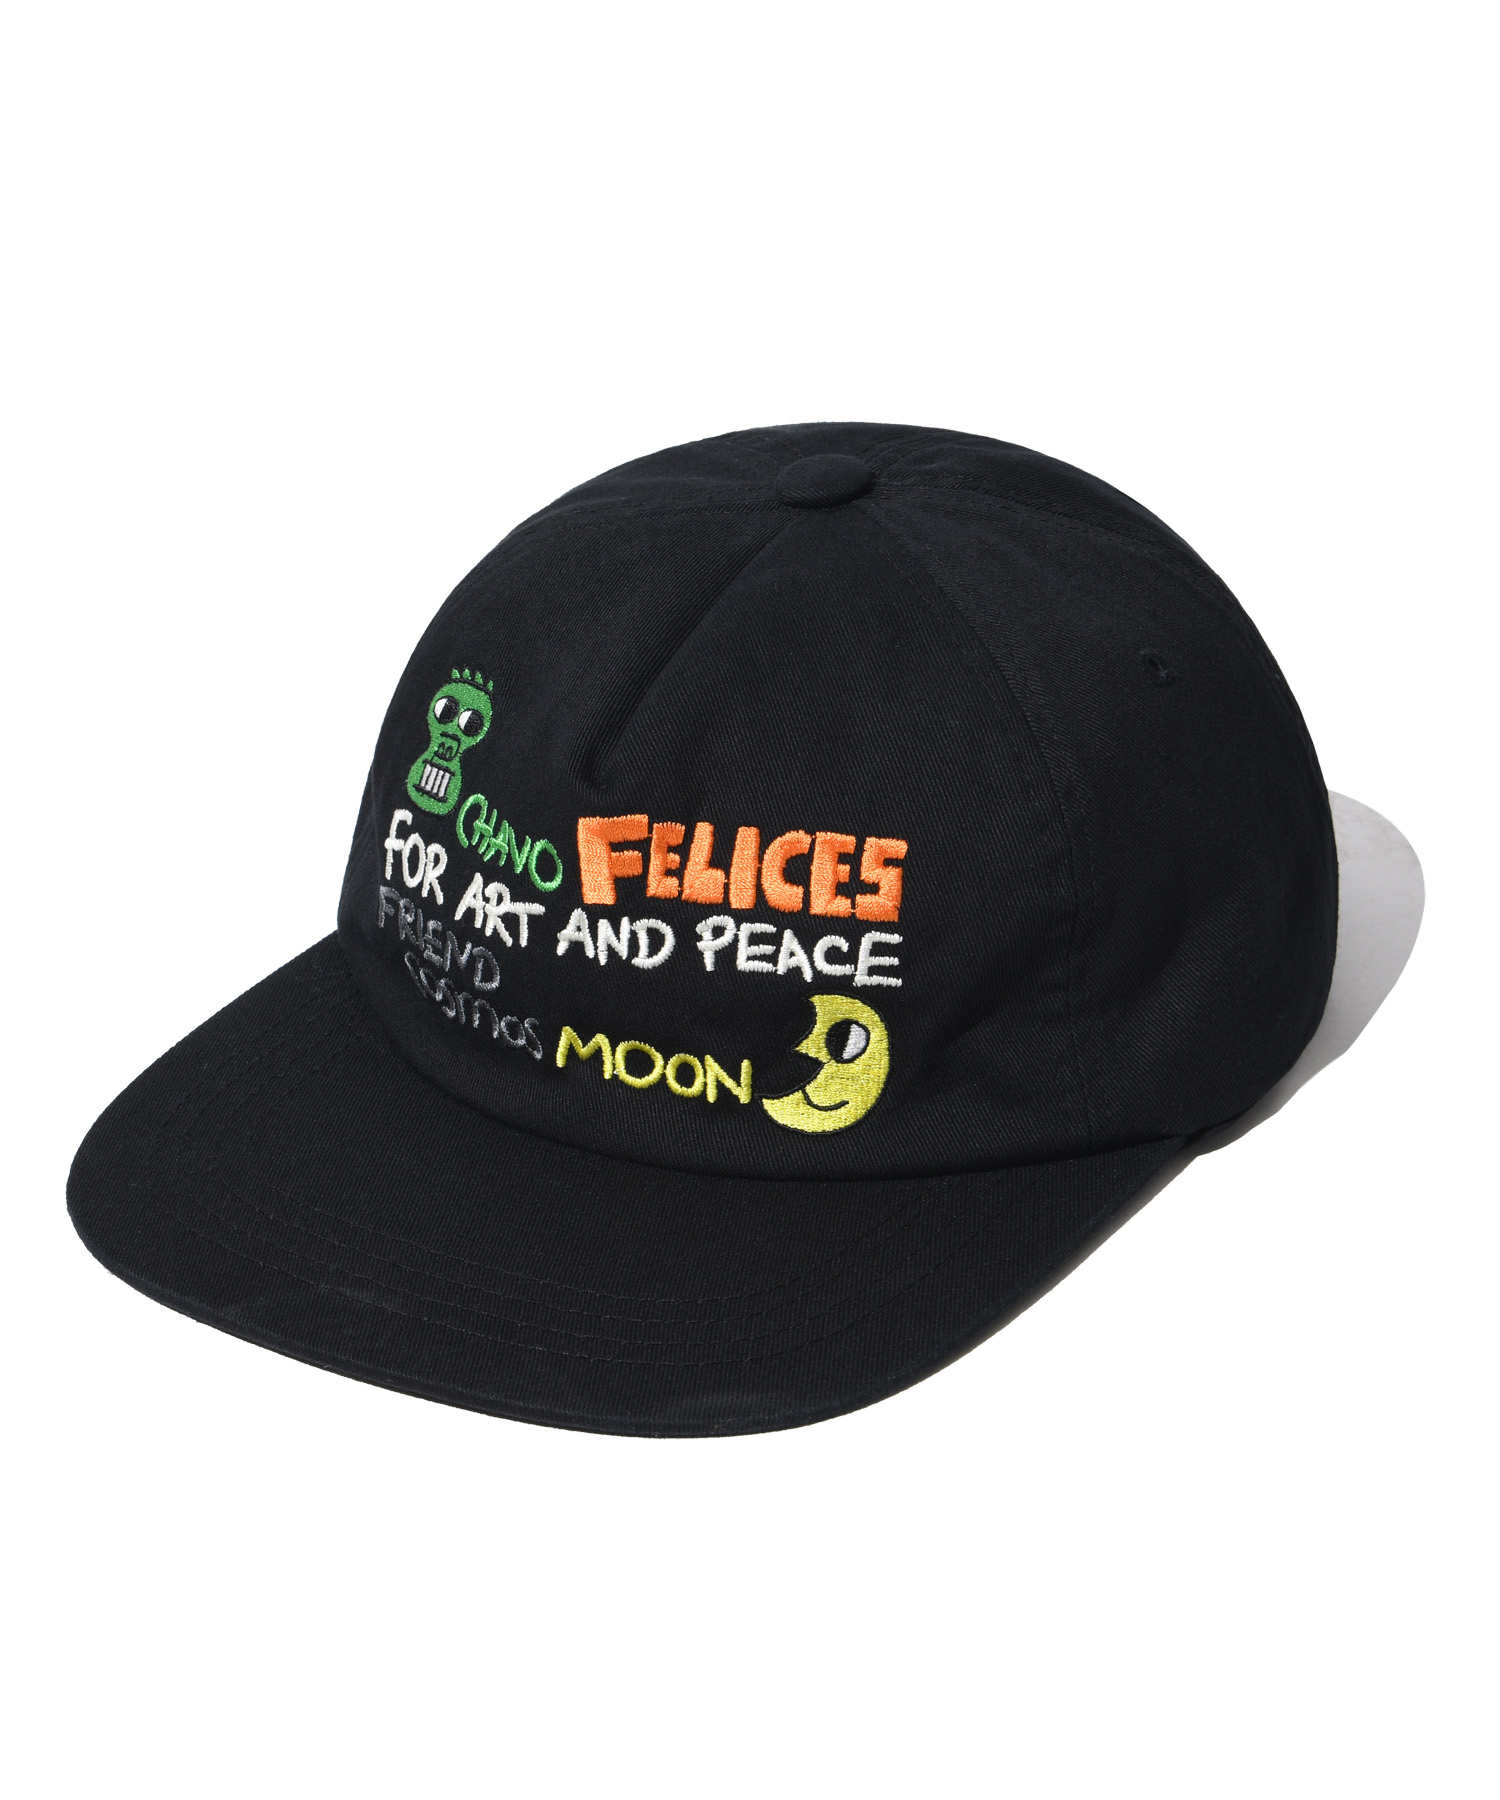 MOON FOR ART AND PEACE 5 PANEL CAP BLACK